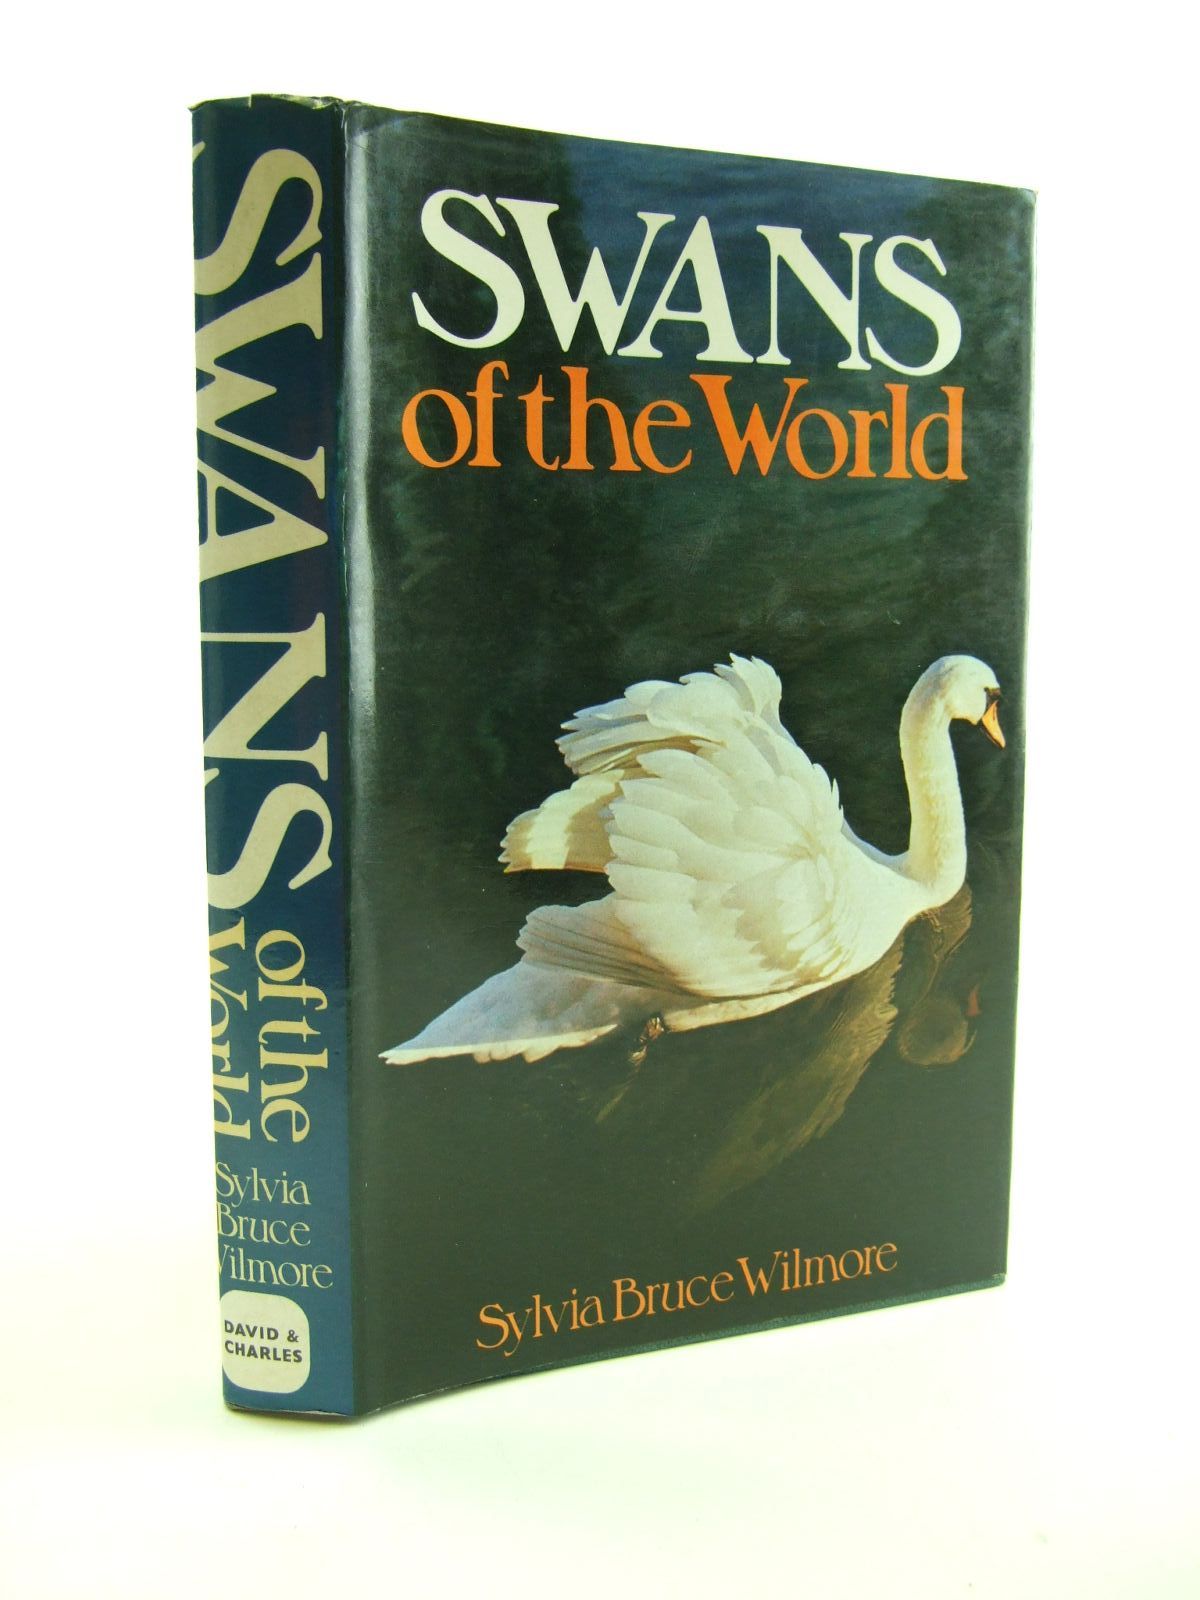 Photo of SWANS OF THE WORLD written by Wilmore, Sylvia Bruce published by David &amp; Charles (STOCK CODE: 1207141)  for sale by Stella & Rose's Books